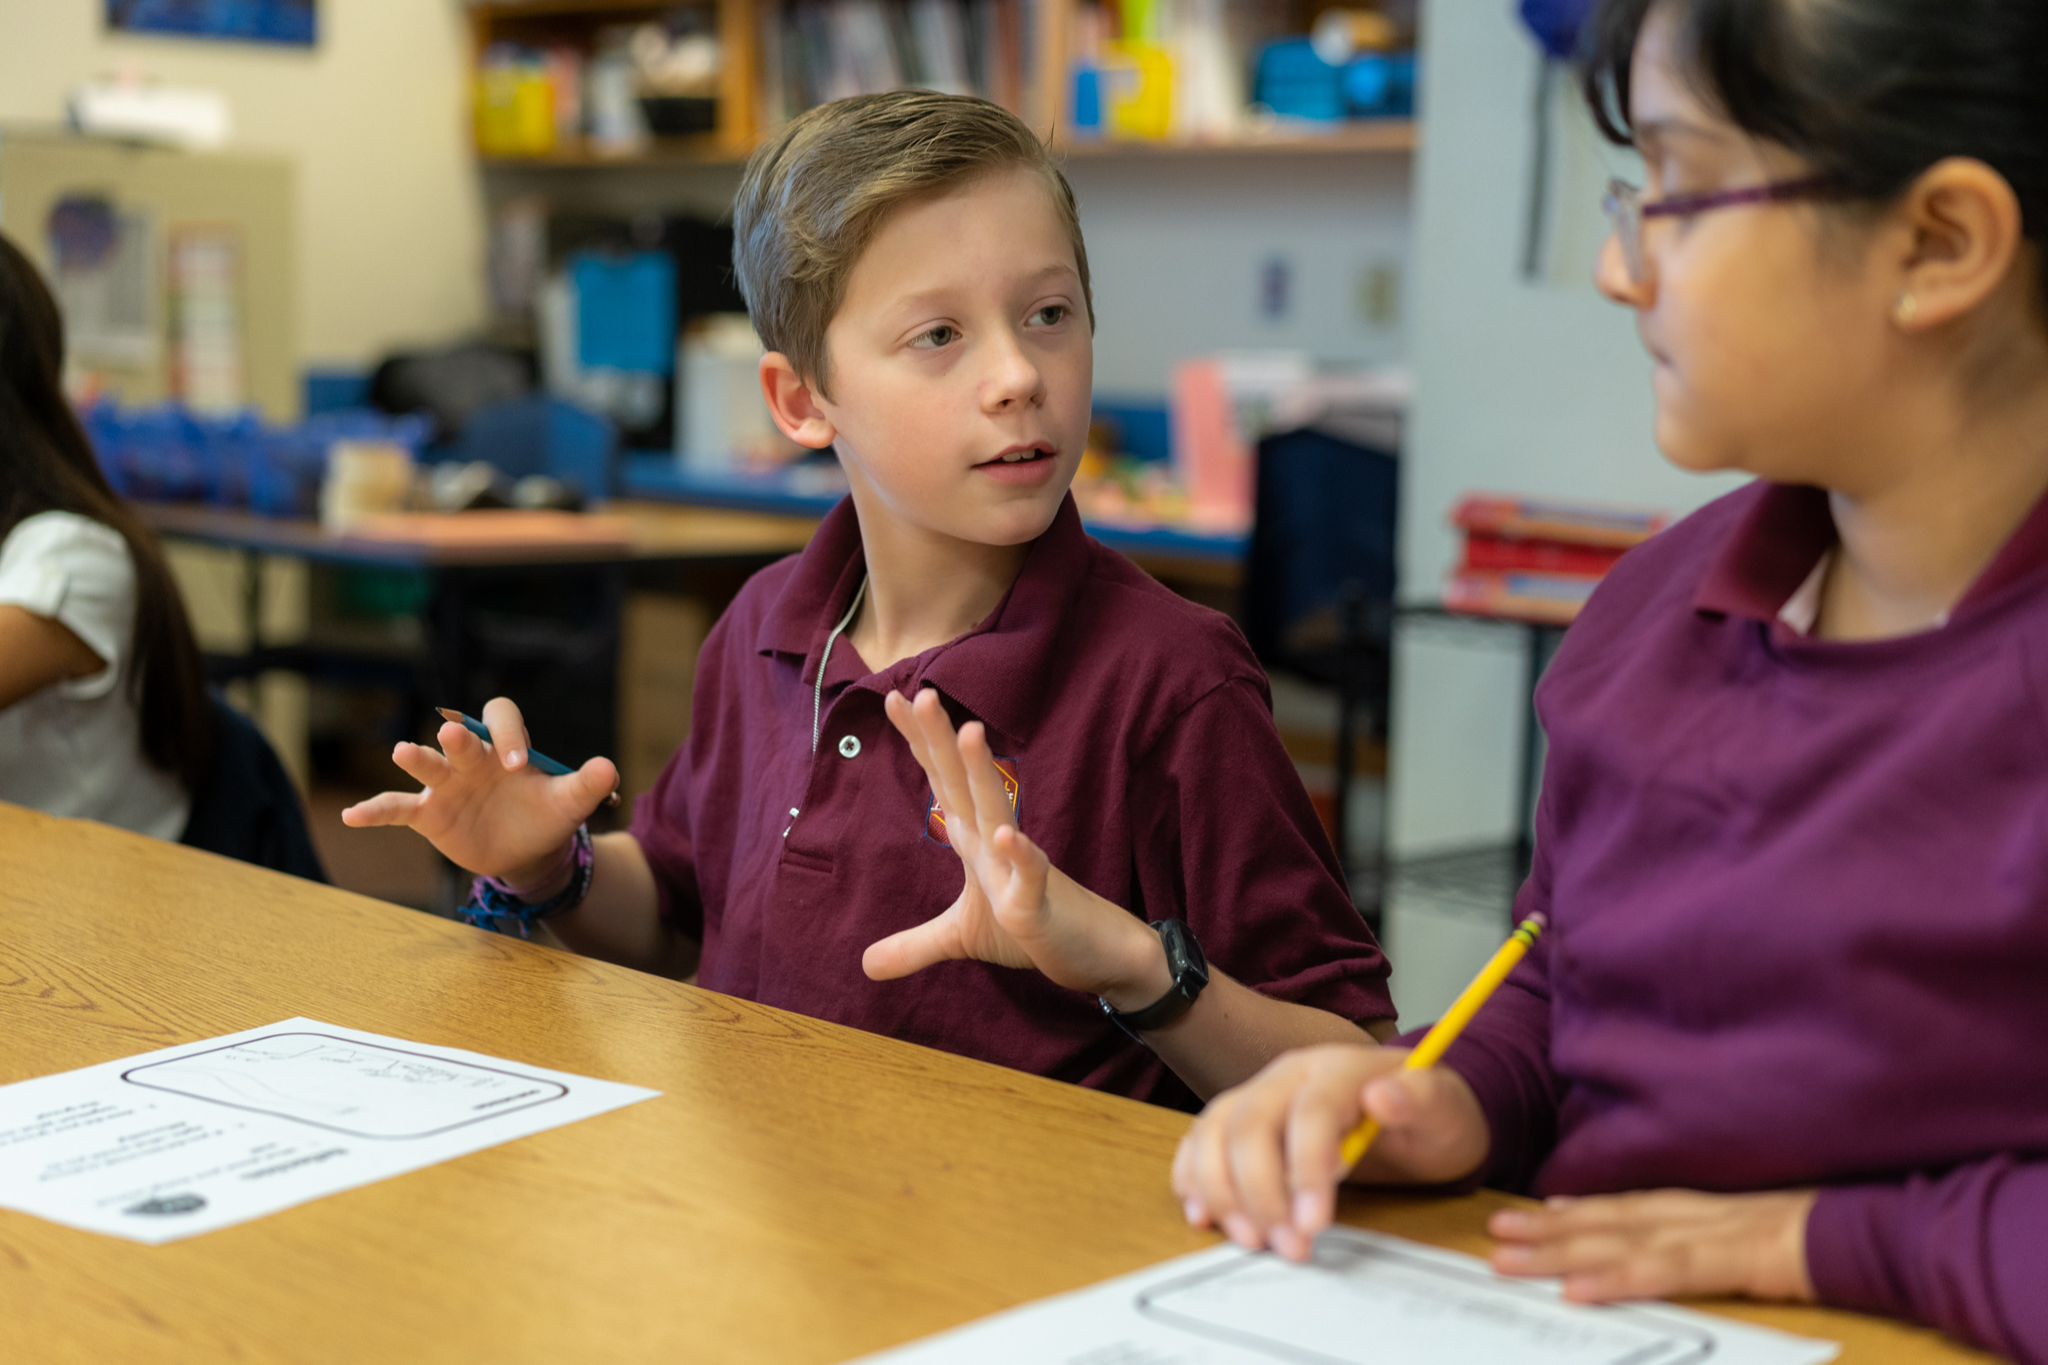 two elementary age students wearing a maroon polo shirt sitting at a desk with papers in front of them